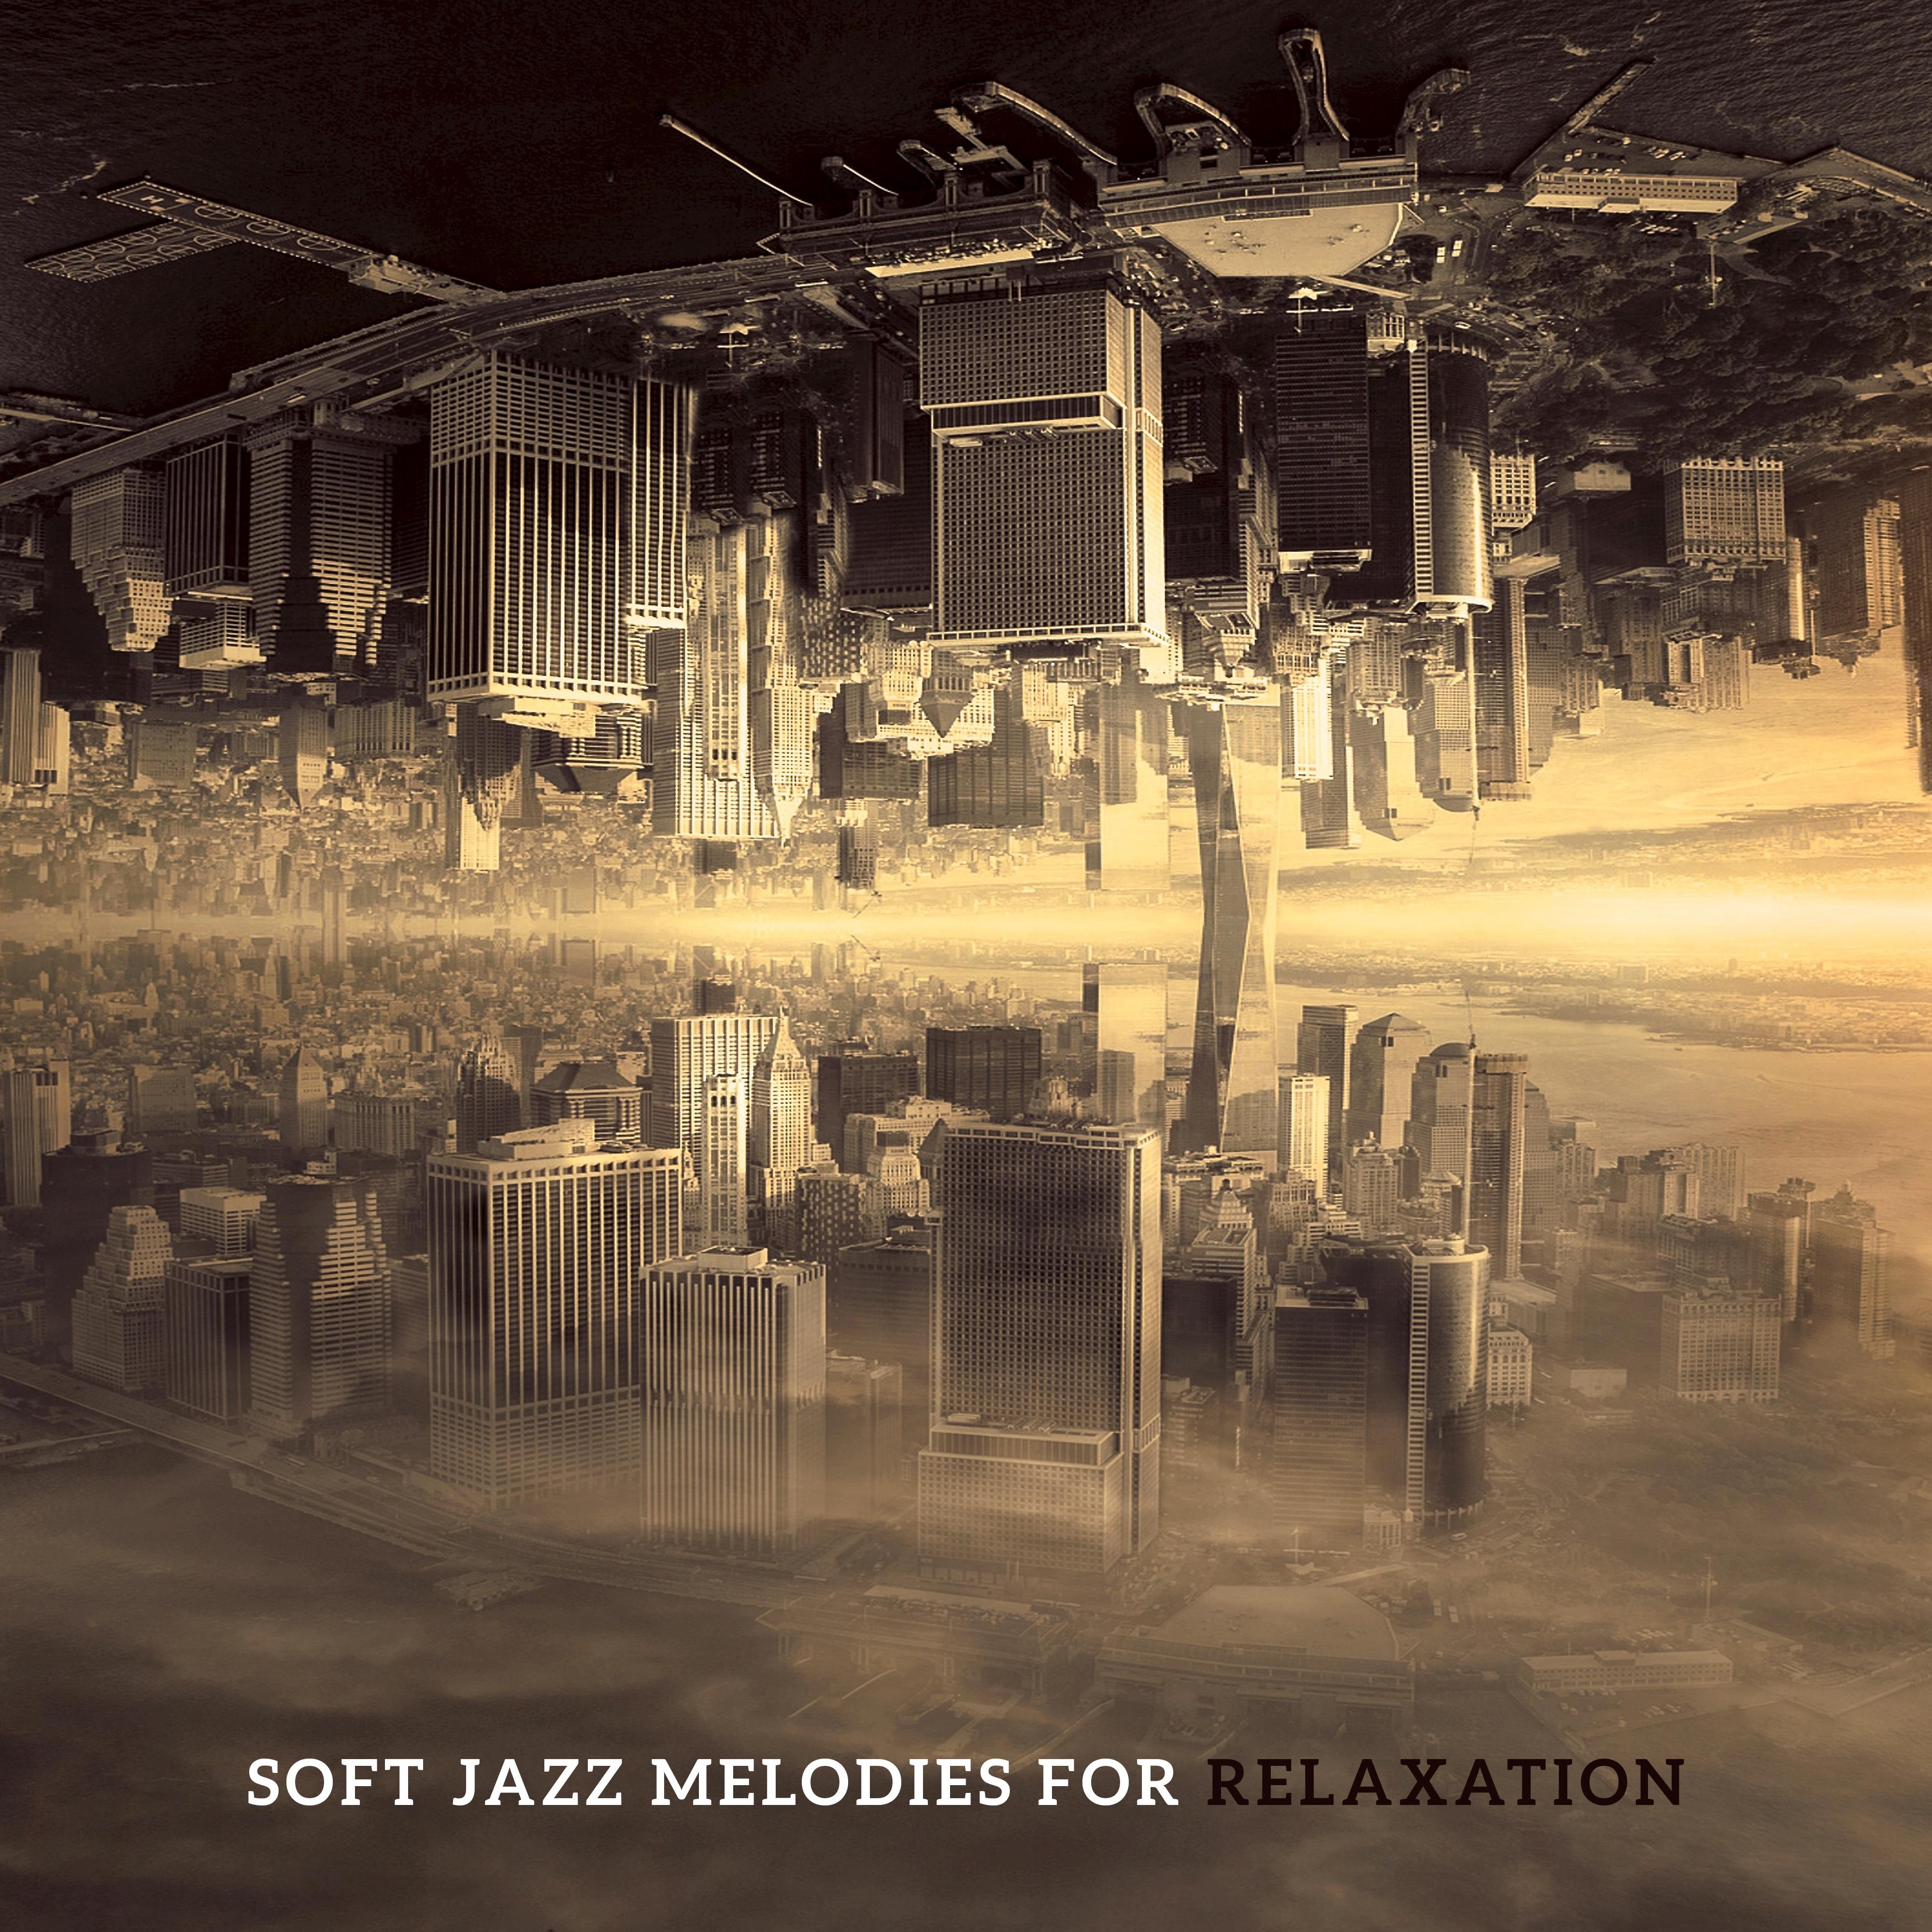 Soft Jazz Melodies for Relaxation